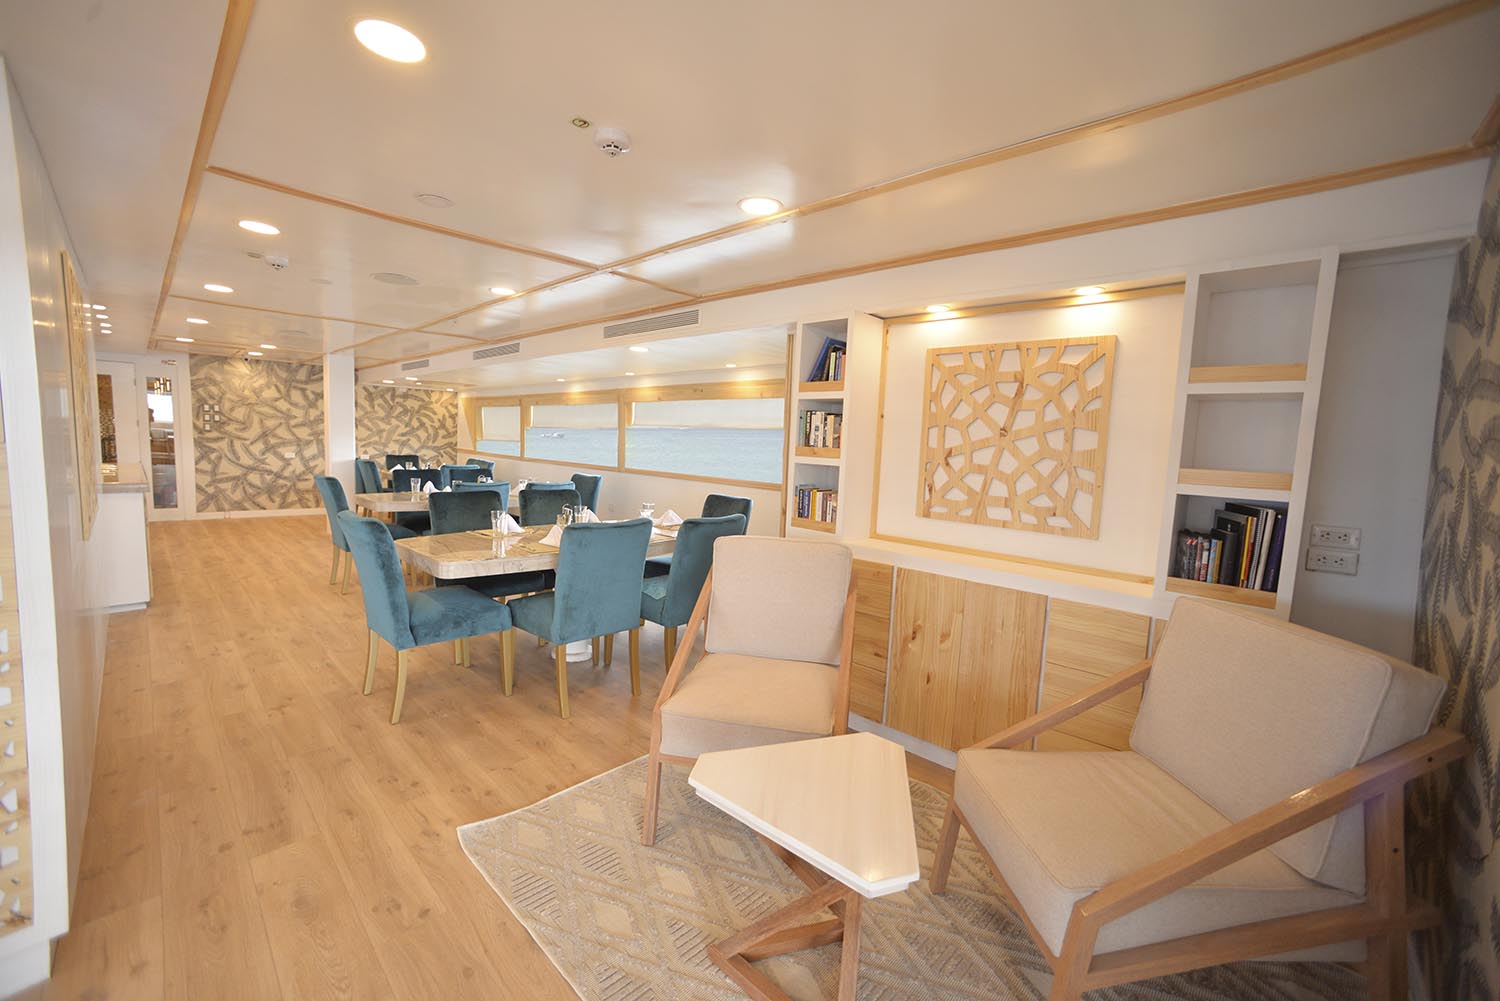 Sea Star lounge and dining area | Galapagos Cruise